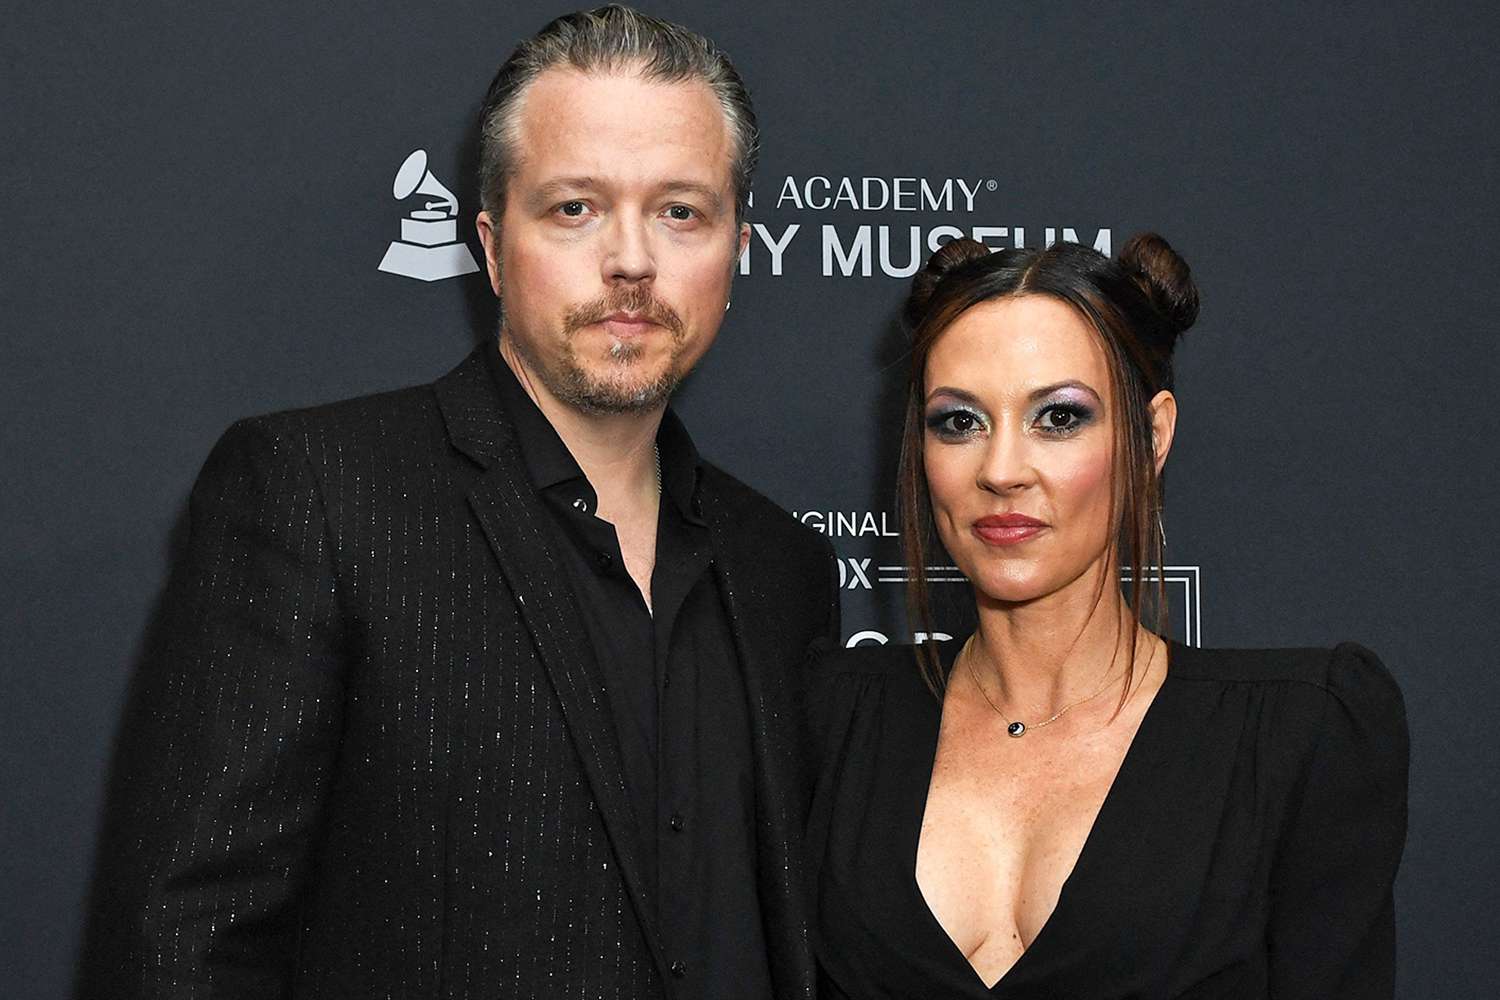 jason-isbell-files-for-divorce-from-amanda-shires-cites-prenup-in-court-filing